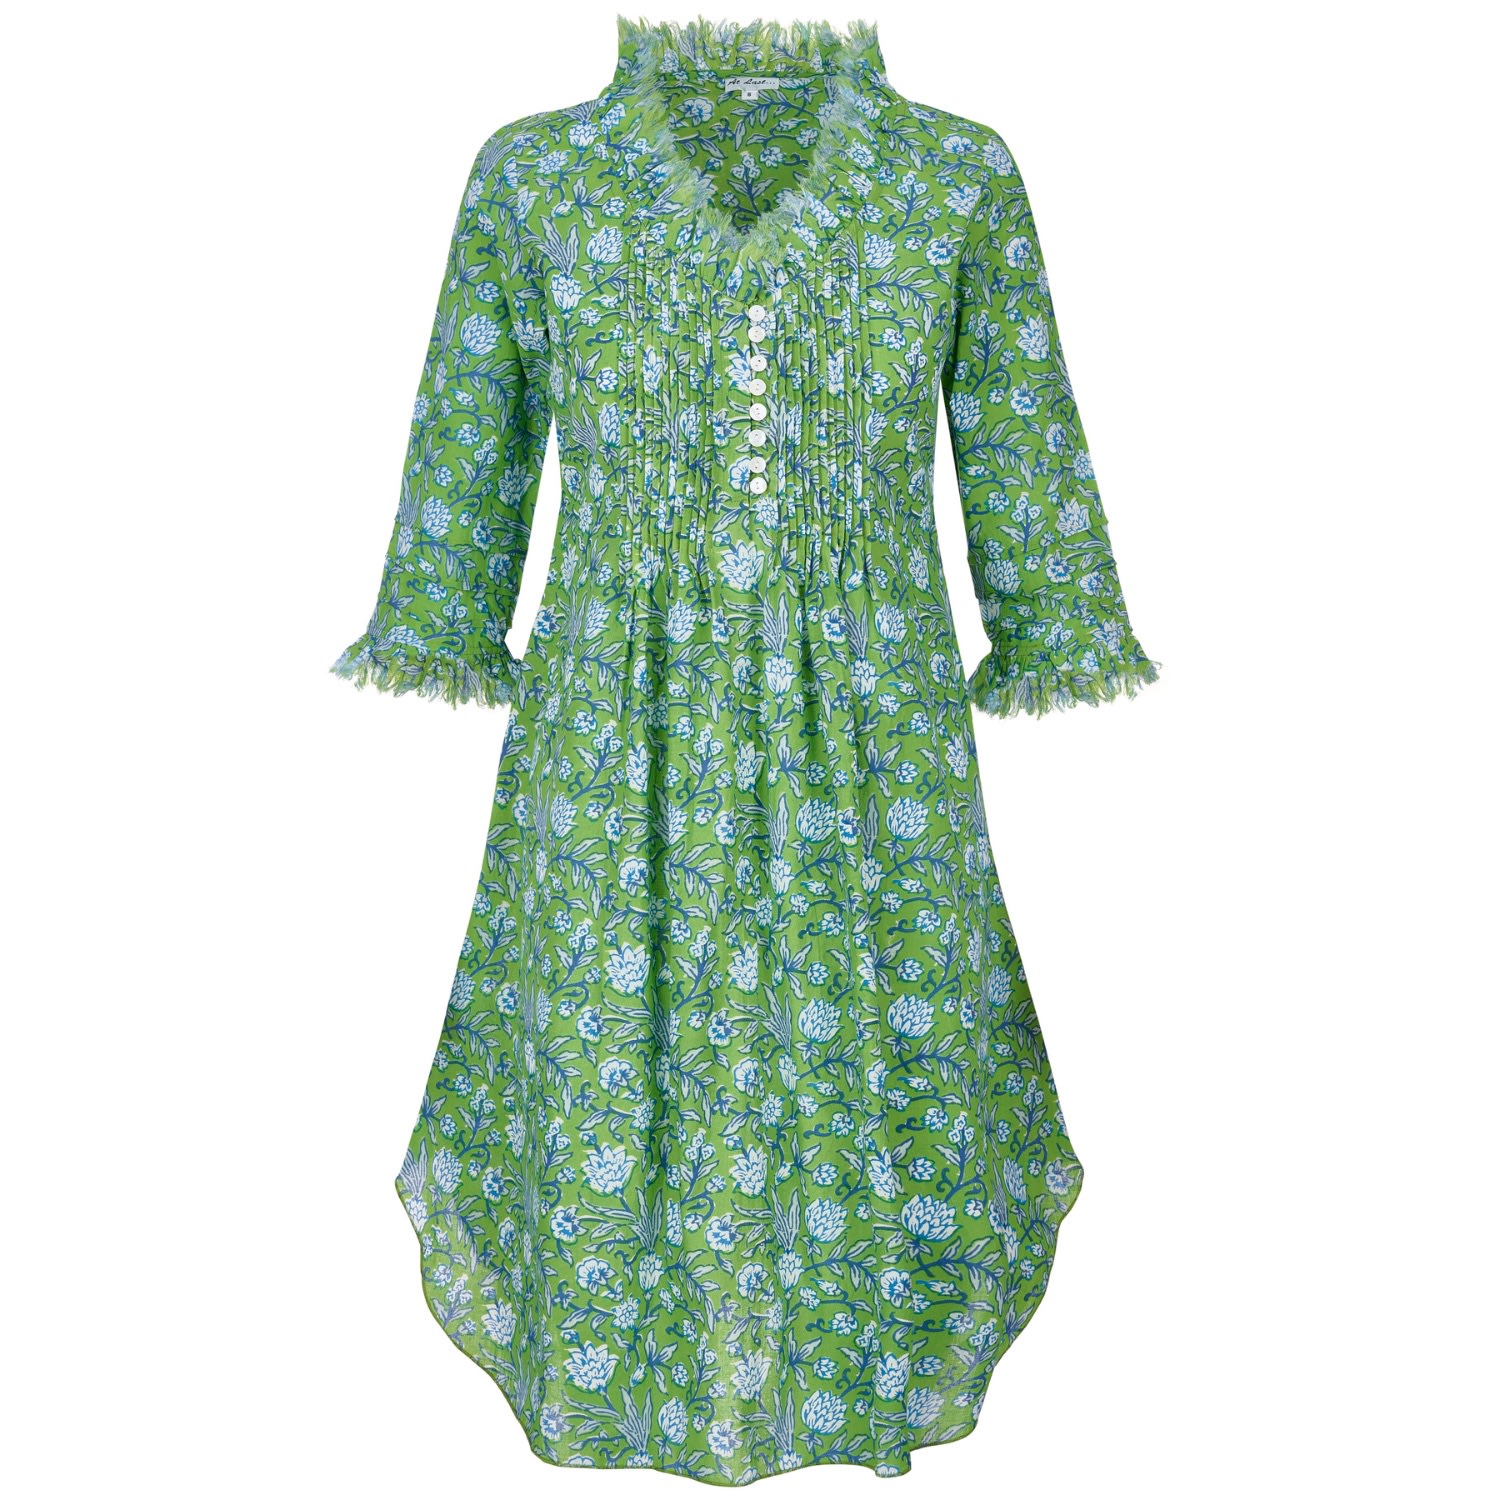 At Last... Women's Annabel Cotton Tunic In Green With White & Blue Flower